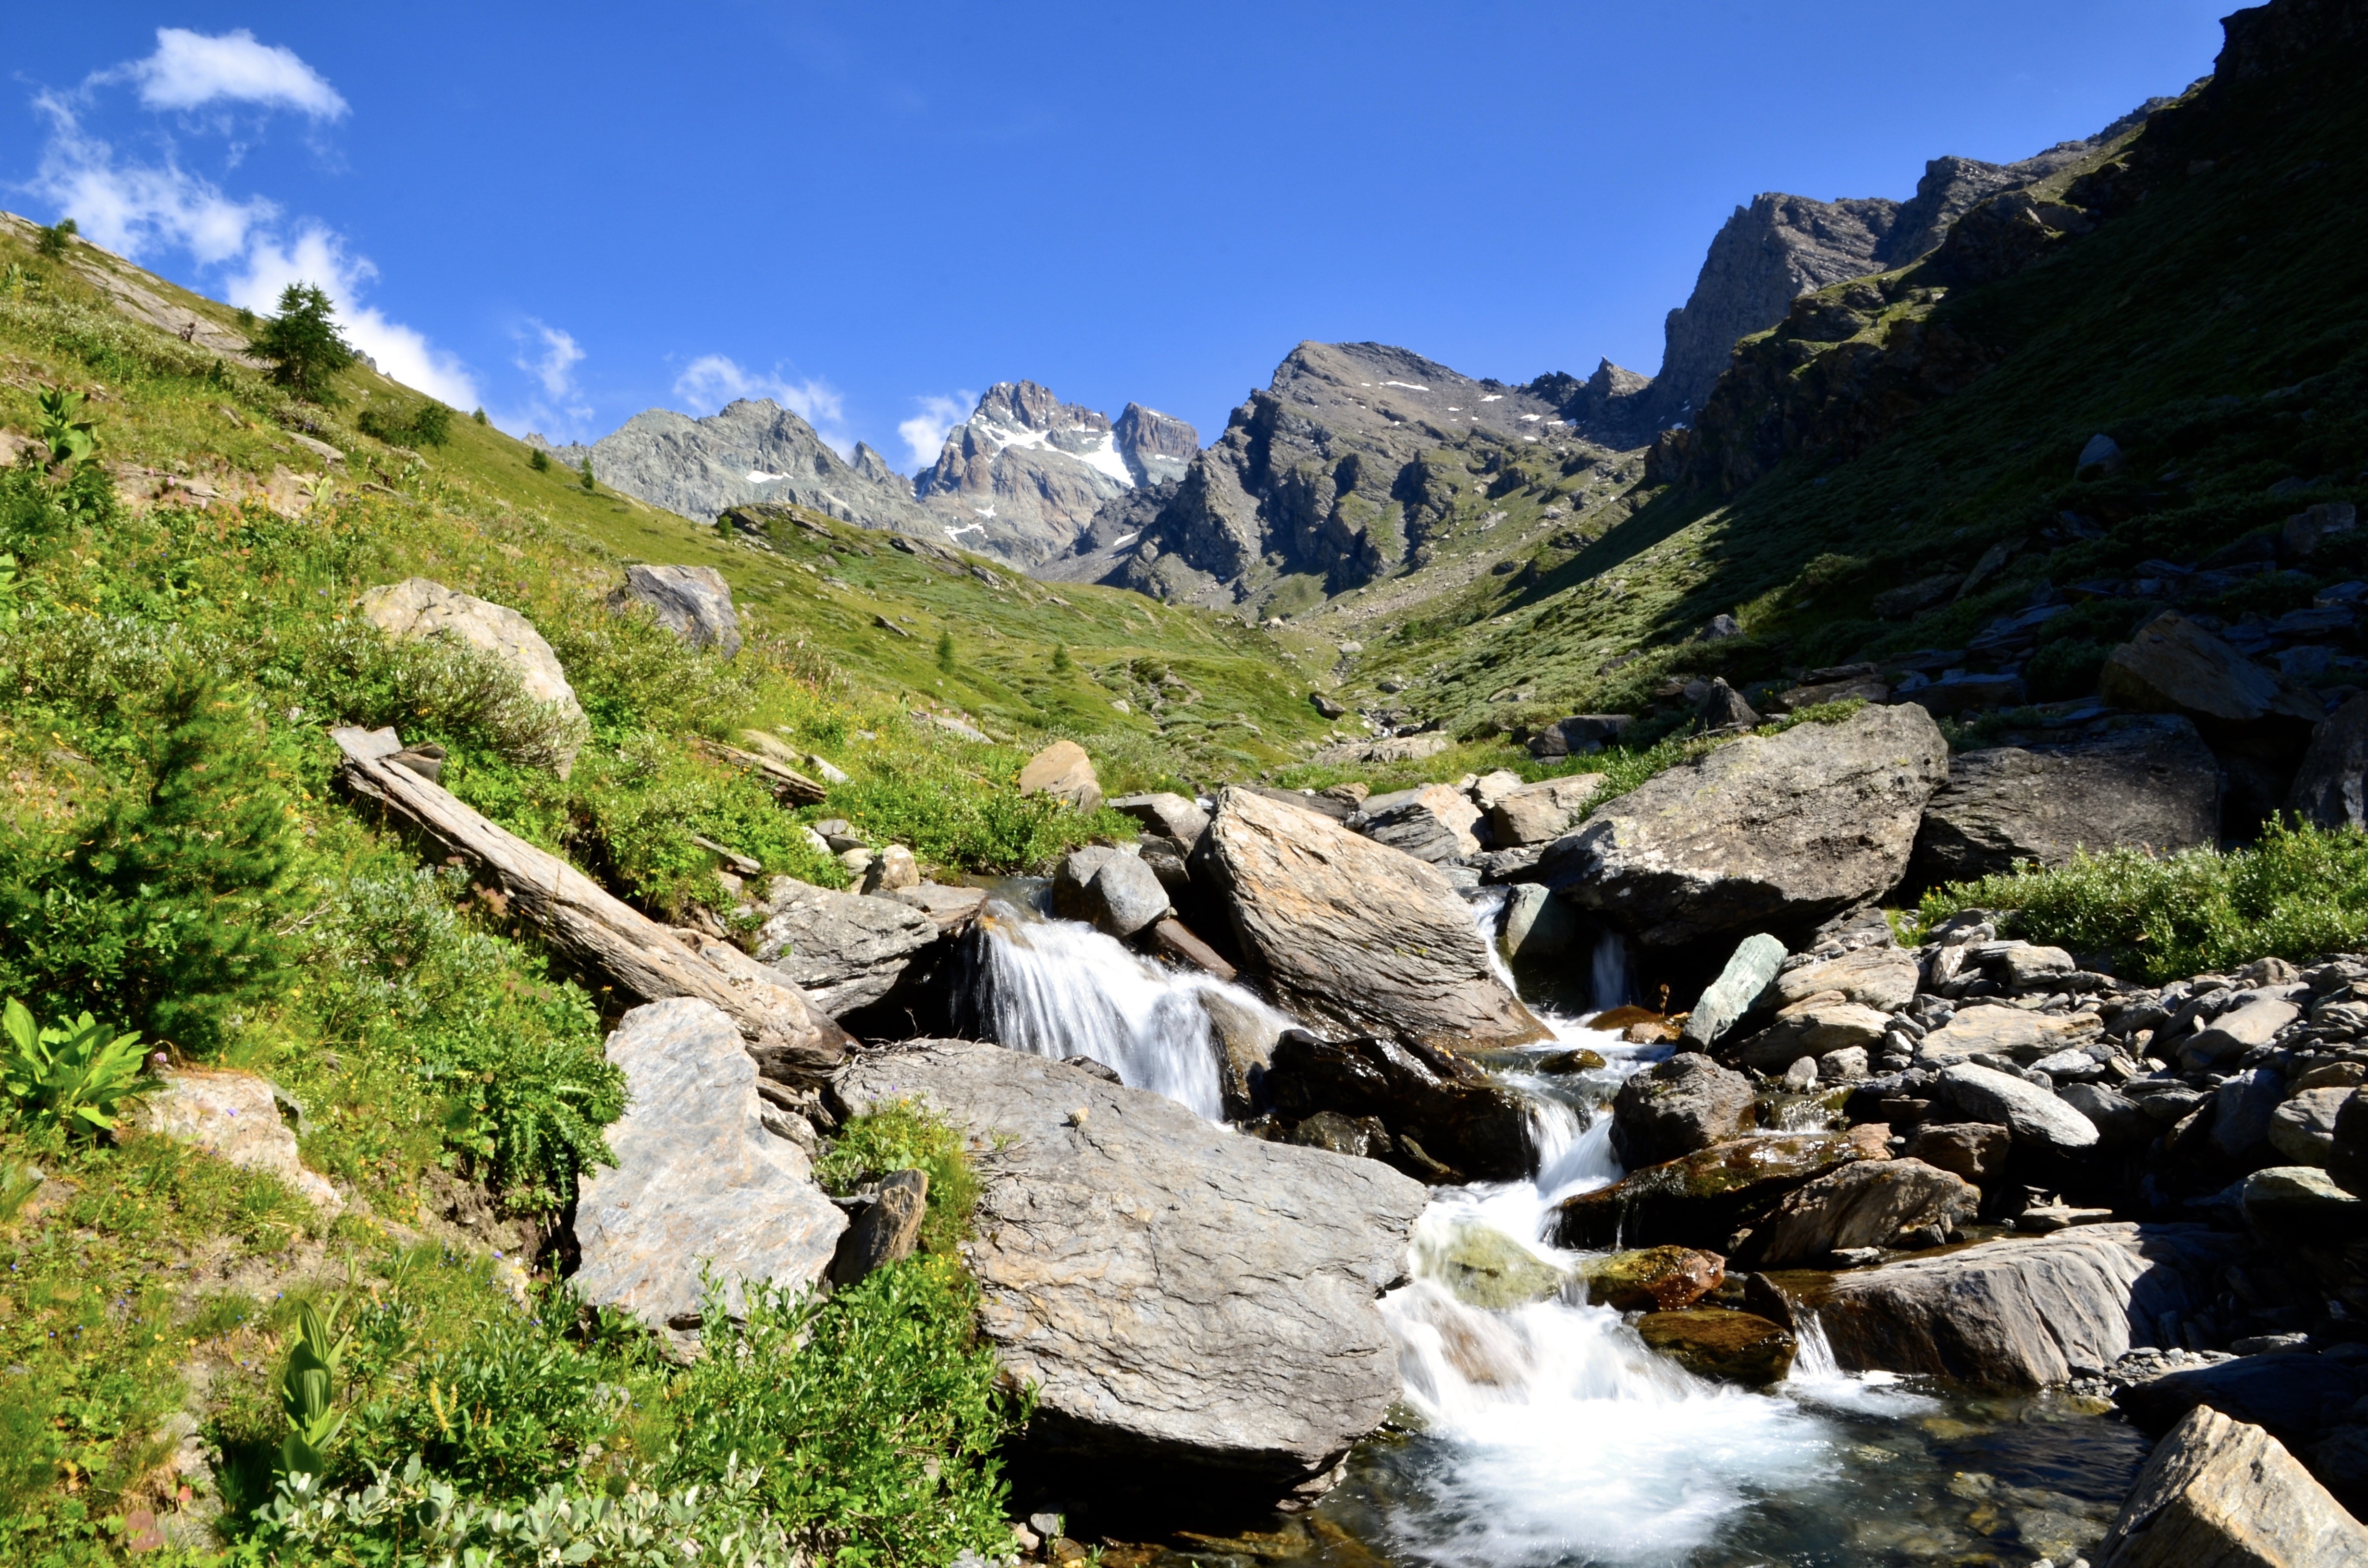 Water, Torrent, Alps, Mountain, Nature, mountain, rock - object